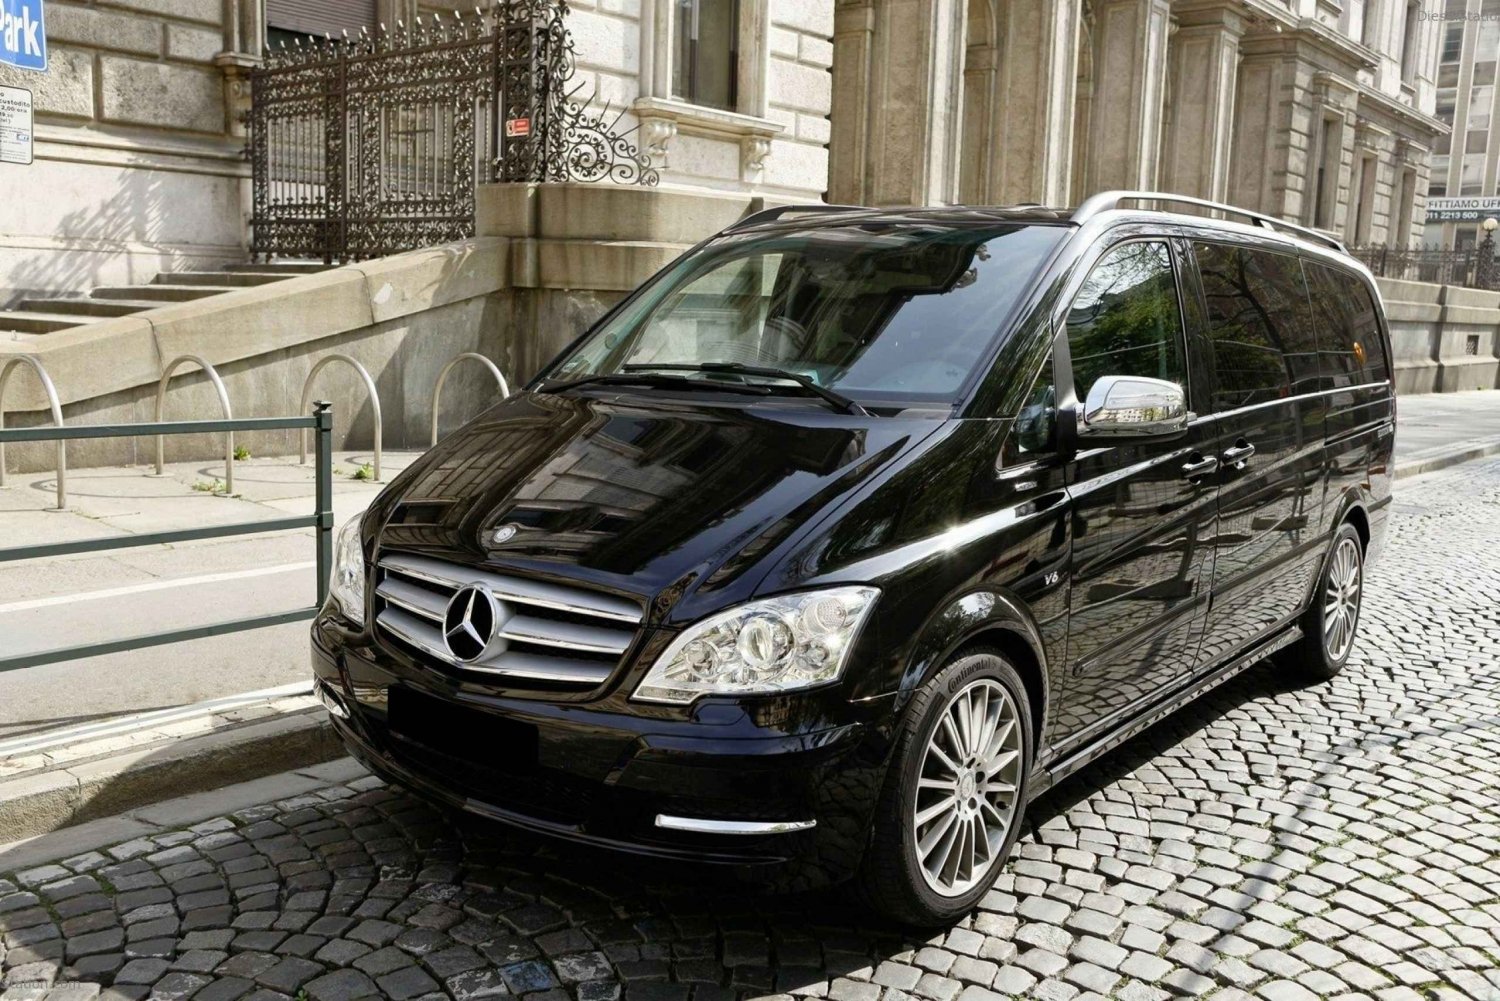 Gdansk Airport: Private Transfer to Gdansk, Sopot, or Gdynia